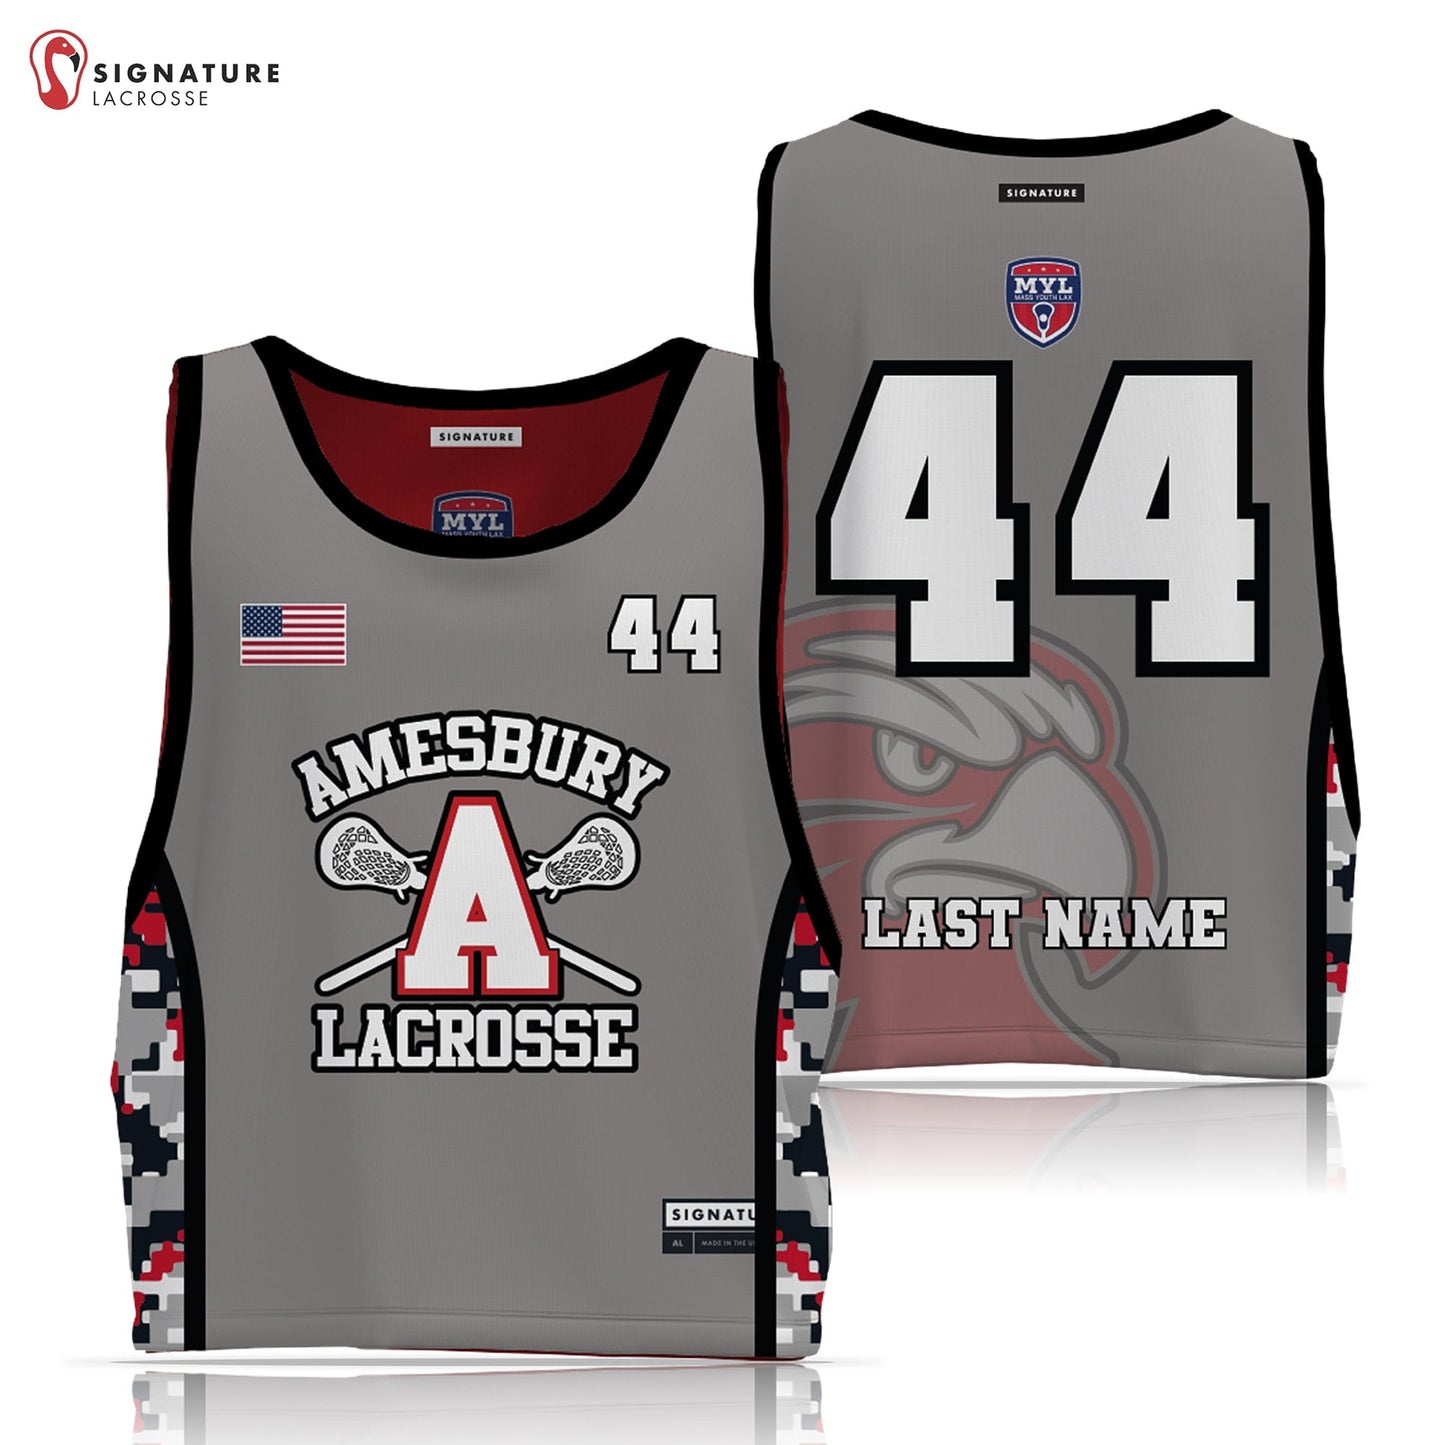 Amesbury Youth Lacrosse Men's Player Reversible Game Pinnie Signature Lacrosse